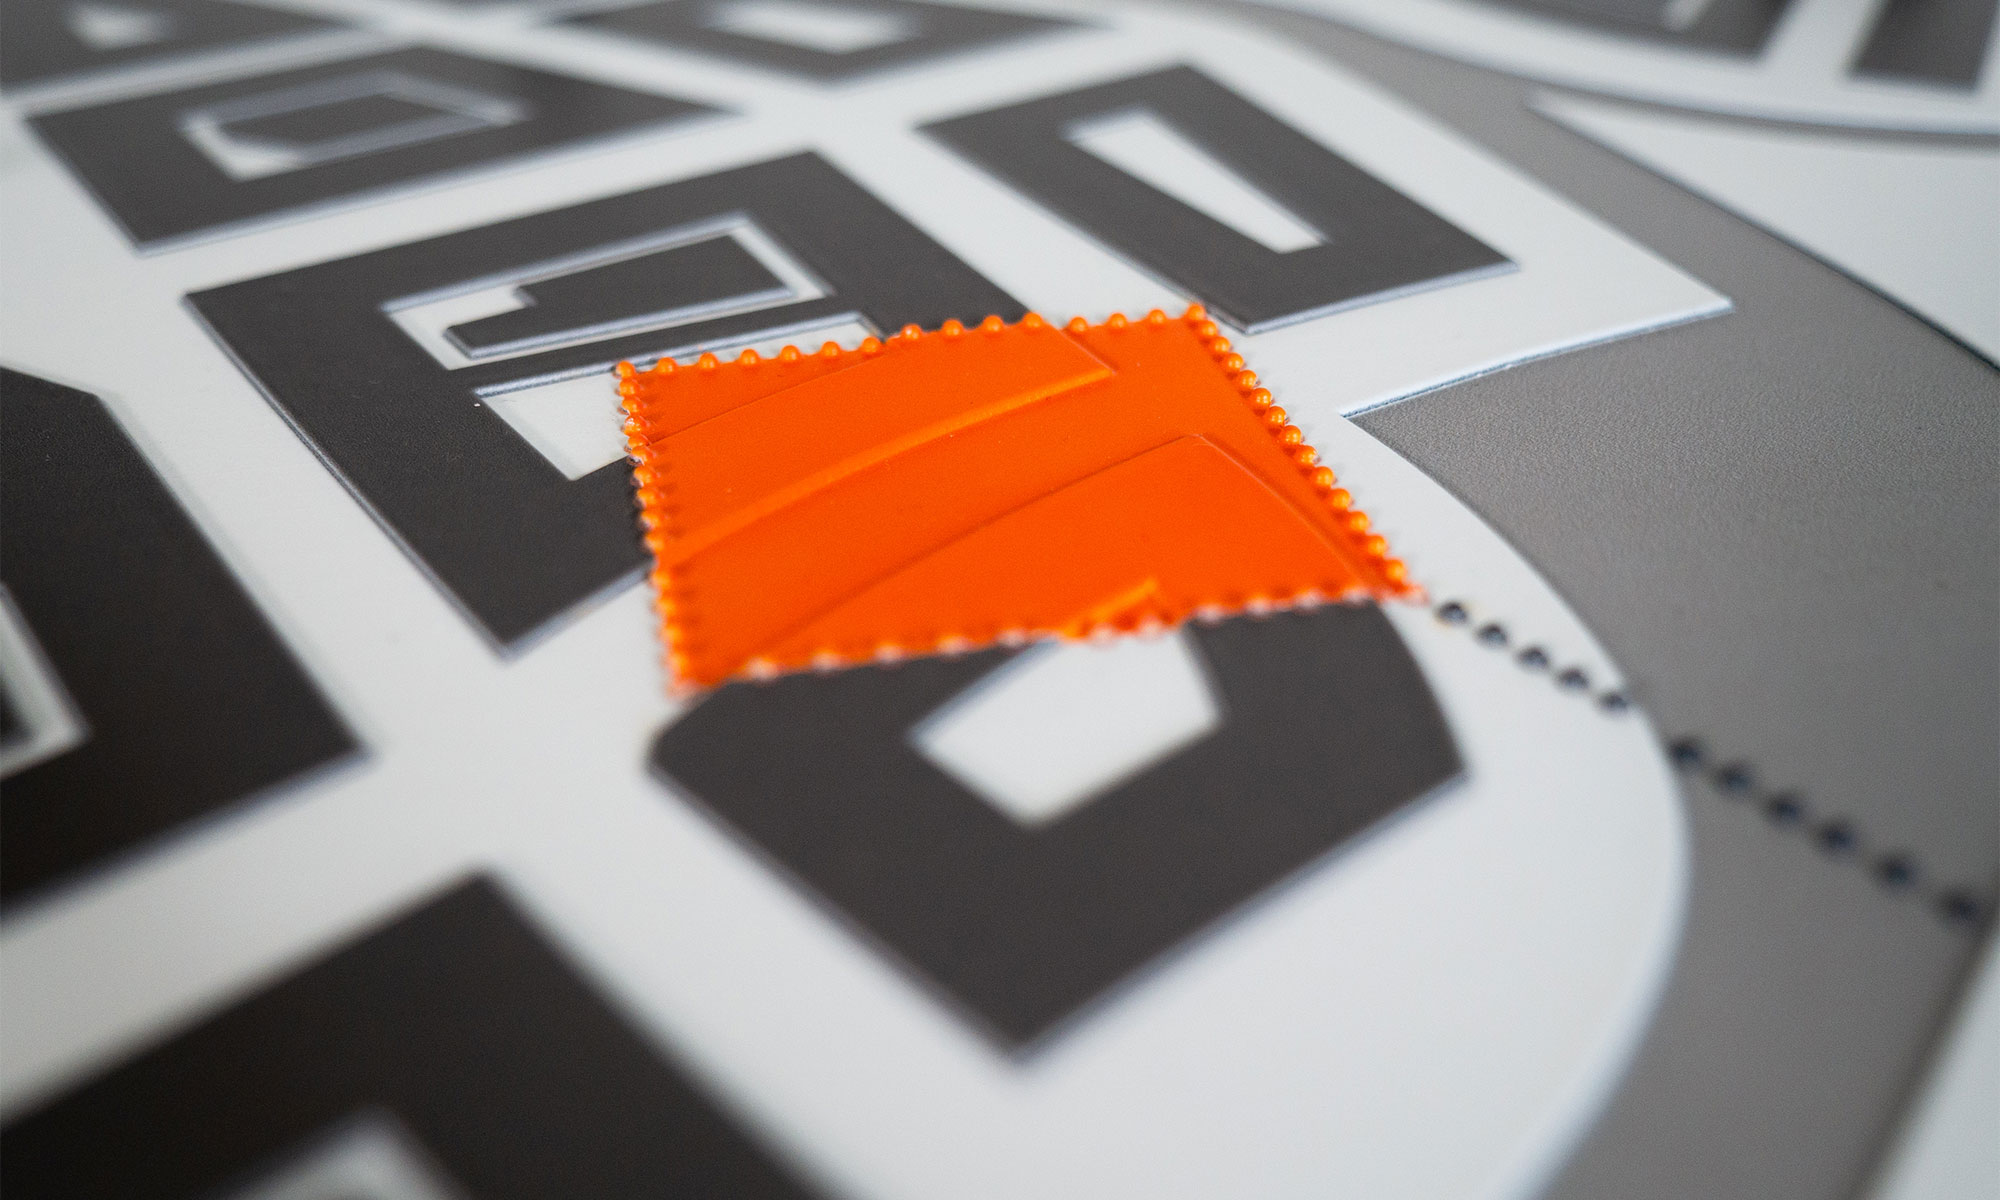 Close-up of the tactile floor plan, which forms the basis of the tactile model. Highlighted here in orange is the section within the floor plan, which is shown in the corner of the tactile model as a three-dimensional detail. A tactile dotted line connects the section and the three-dimensional detail.